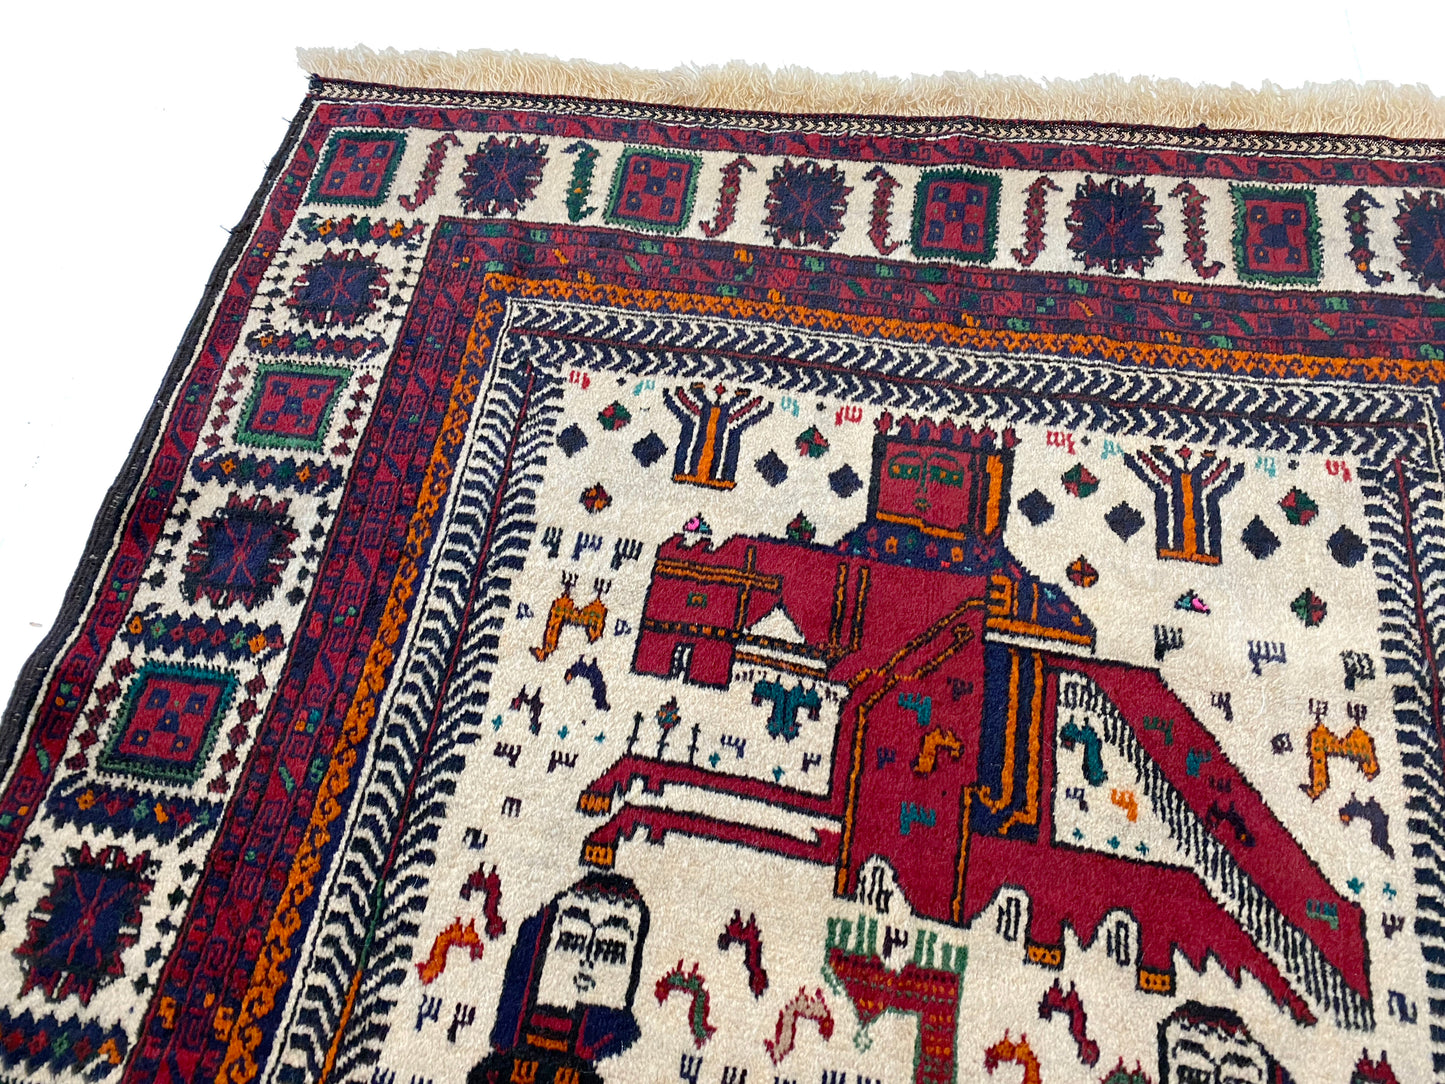 Detail of rider on Afghan pictorial rug with cream base and three figures in blue cloaks across the middle, figures with crowns on horses at the top and bottom of rug woven in deep blue and reds